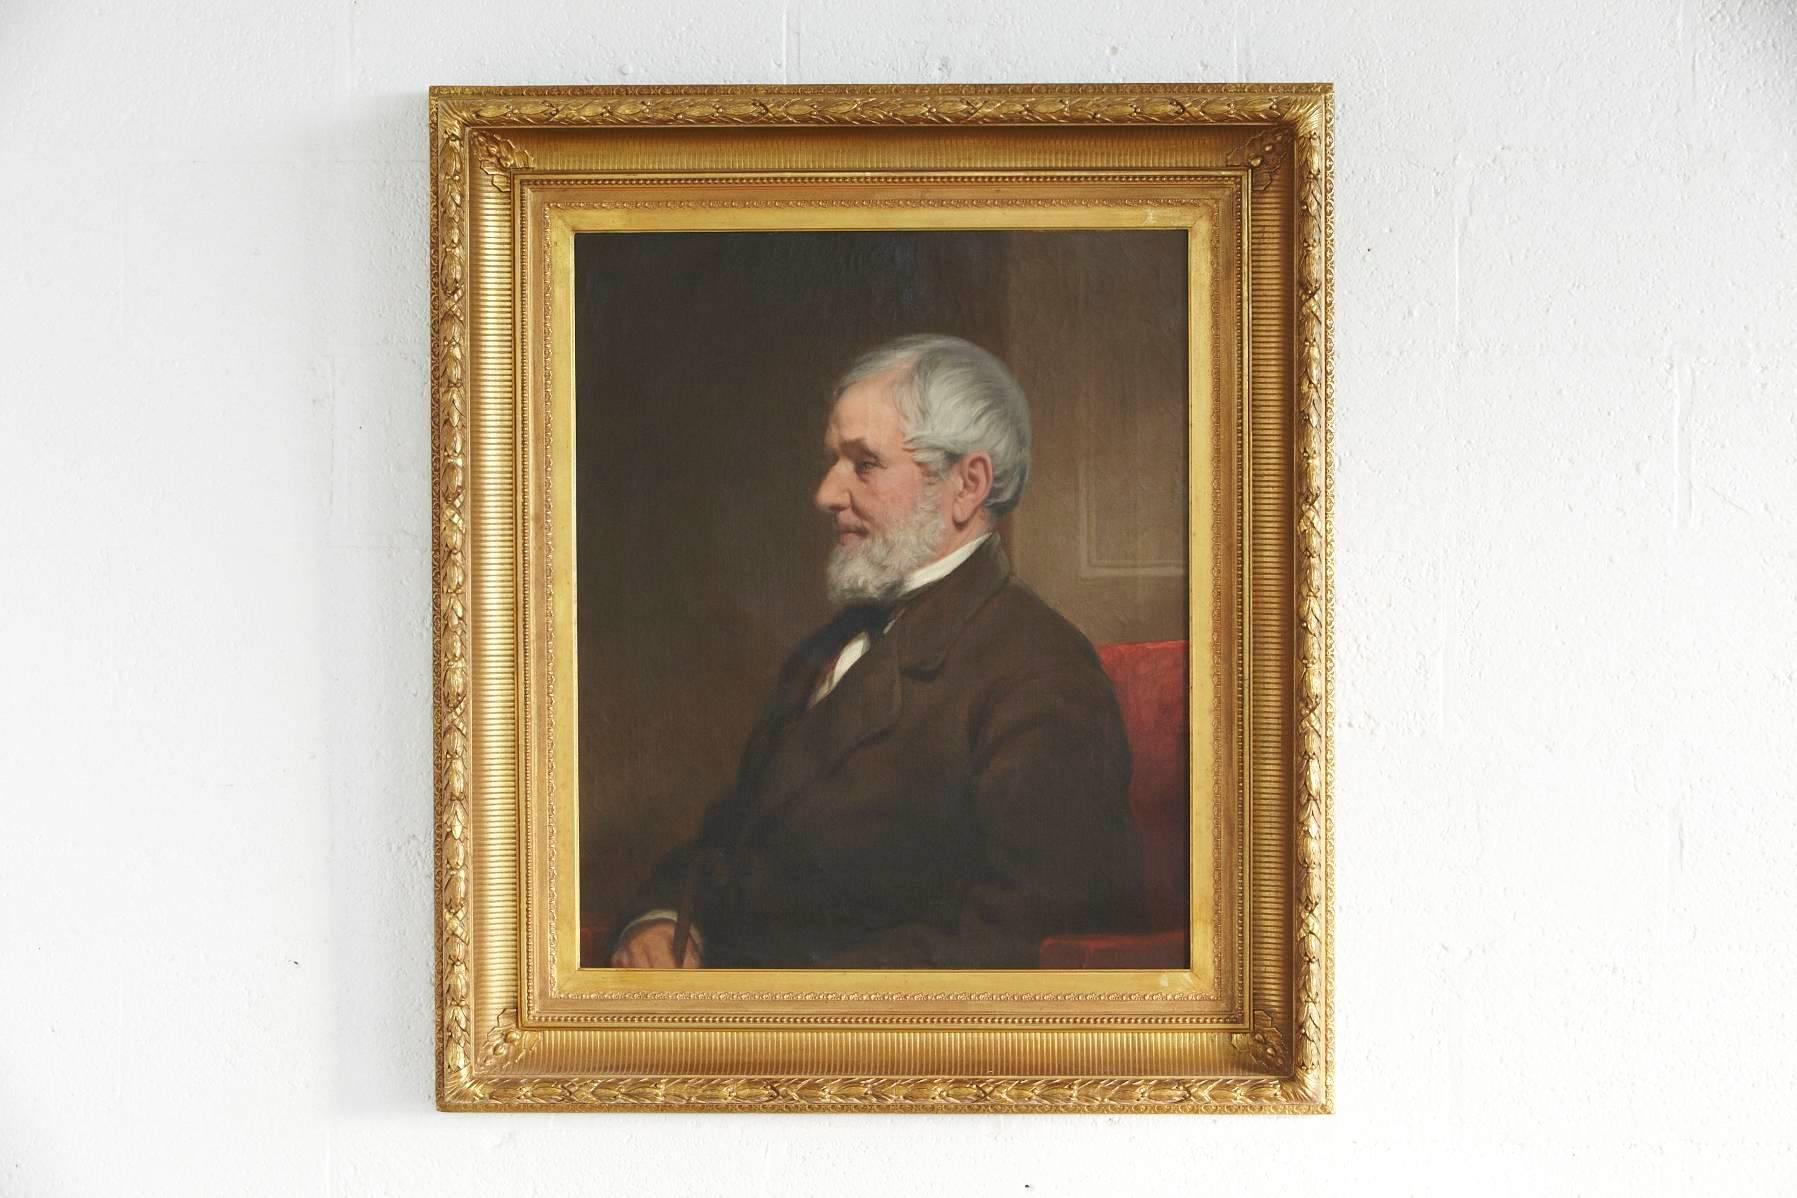 Oil on canvas, self portrait of Robert Walter Weir.
The frame has been restored, one small professional repair in the canvas.
Dimensions with Frame H 41 x W 36.5 x D 4. Painting H 32 x W 25

June 18 1803 in New Rochelle, NY - May 1 1889, New York